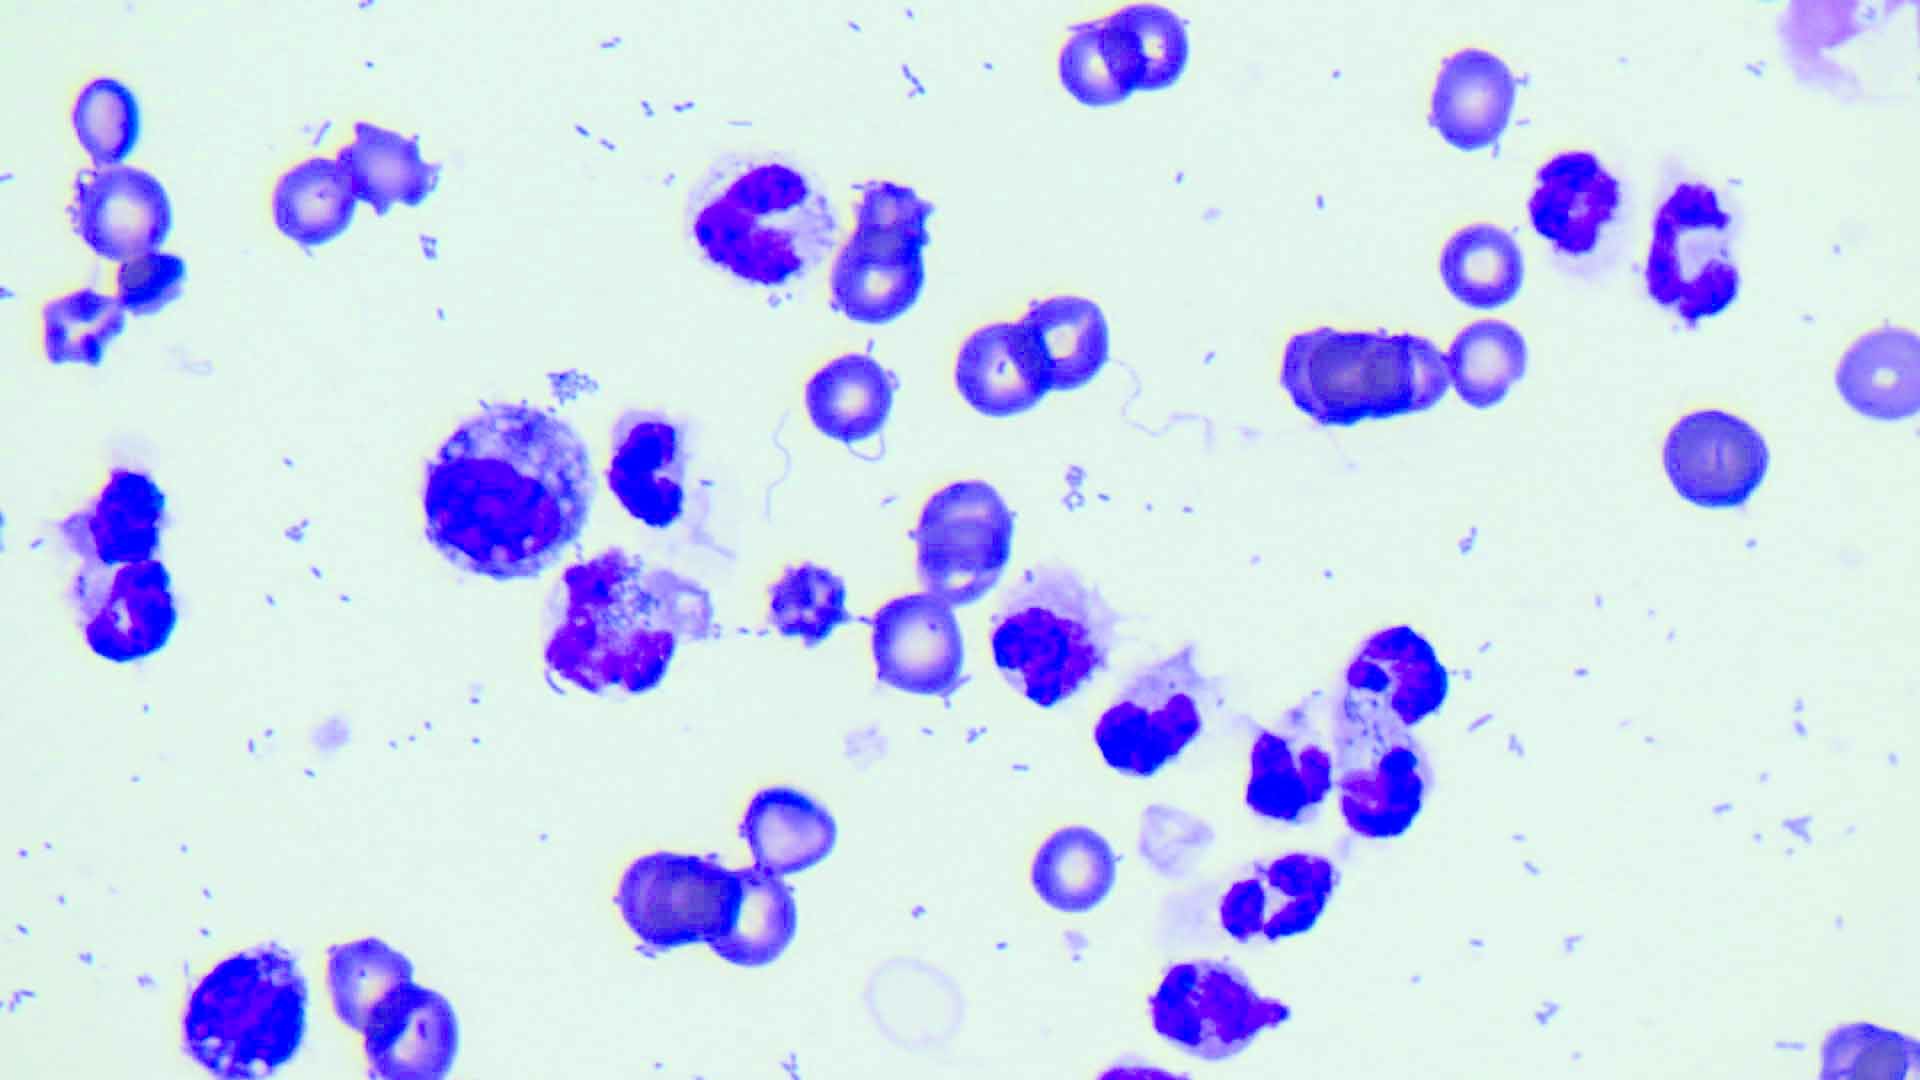 Cytology of the fluid shows the presence of intracellular bacteria 